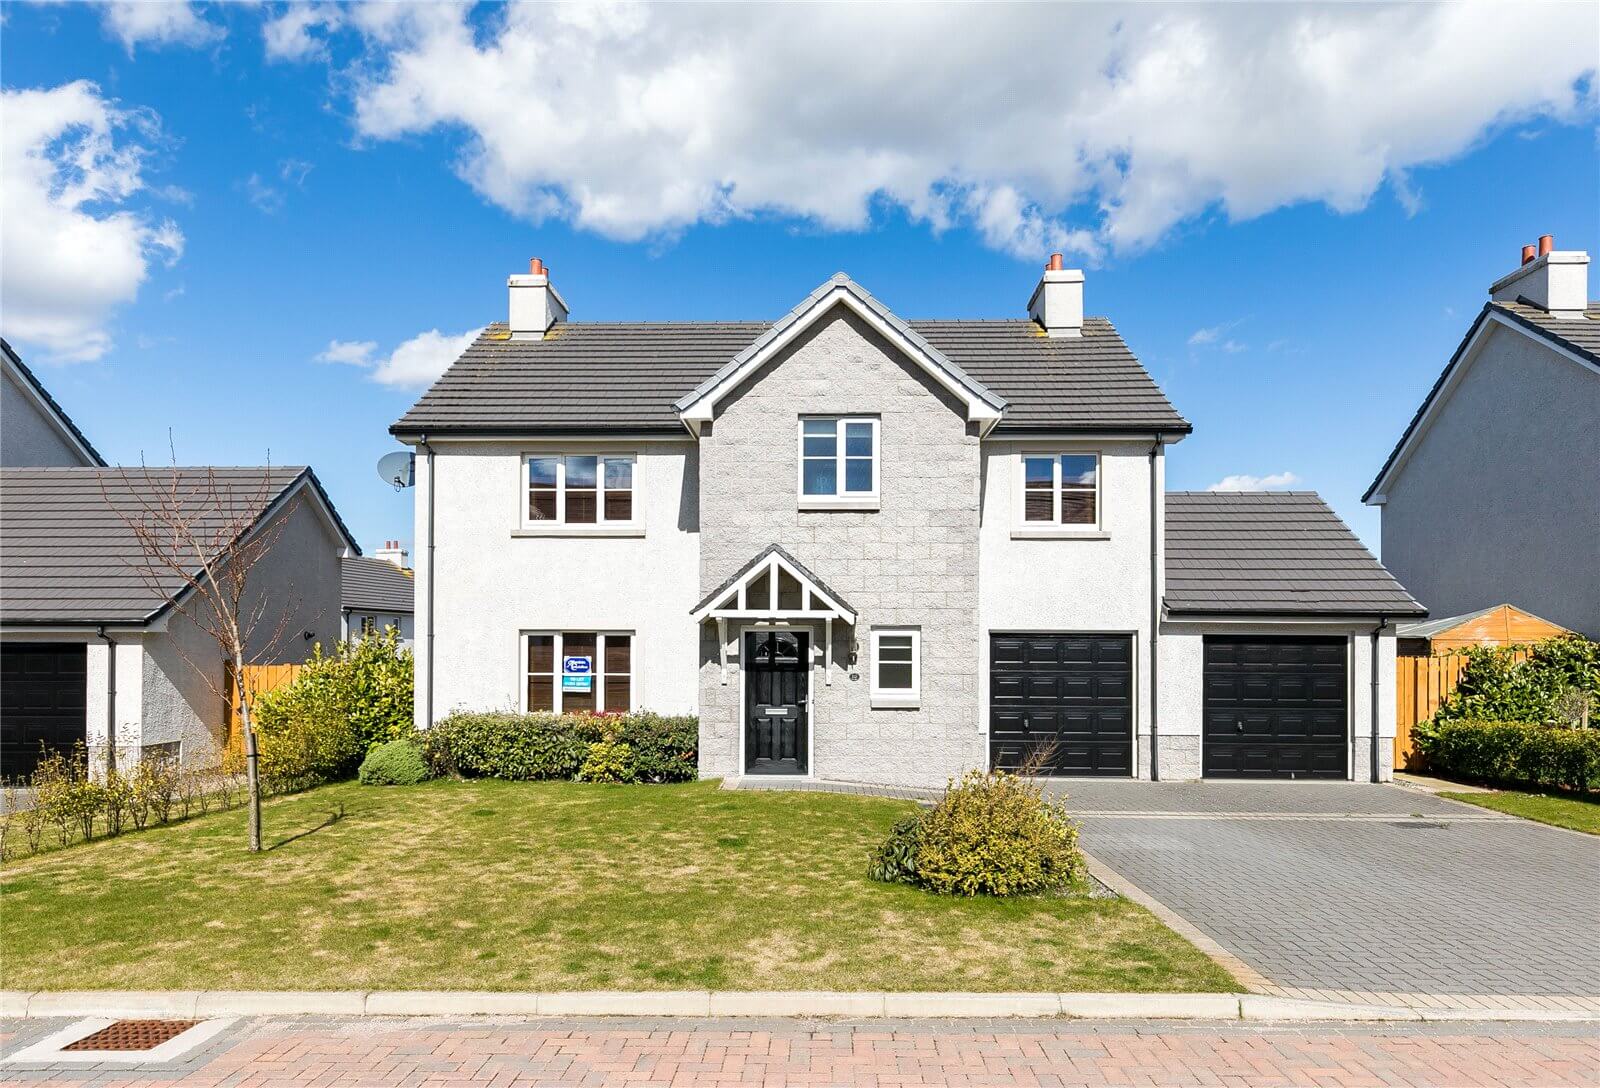 Our latest properties for sale and to let (24th June 2019)